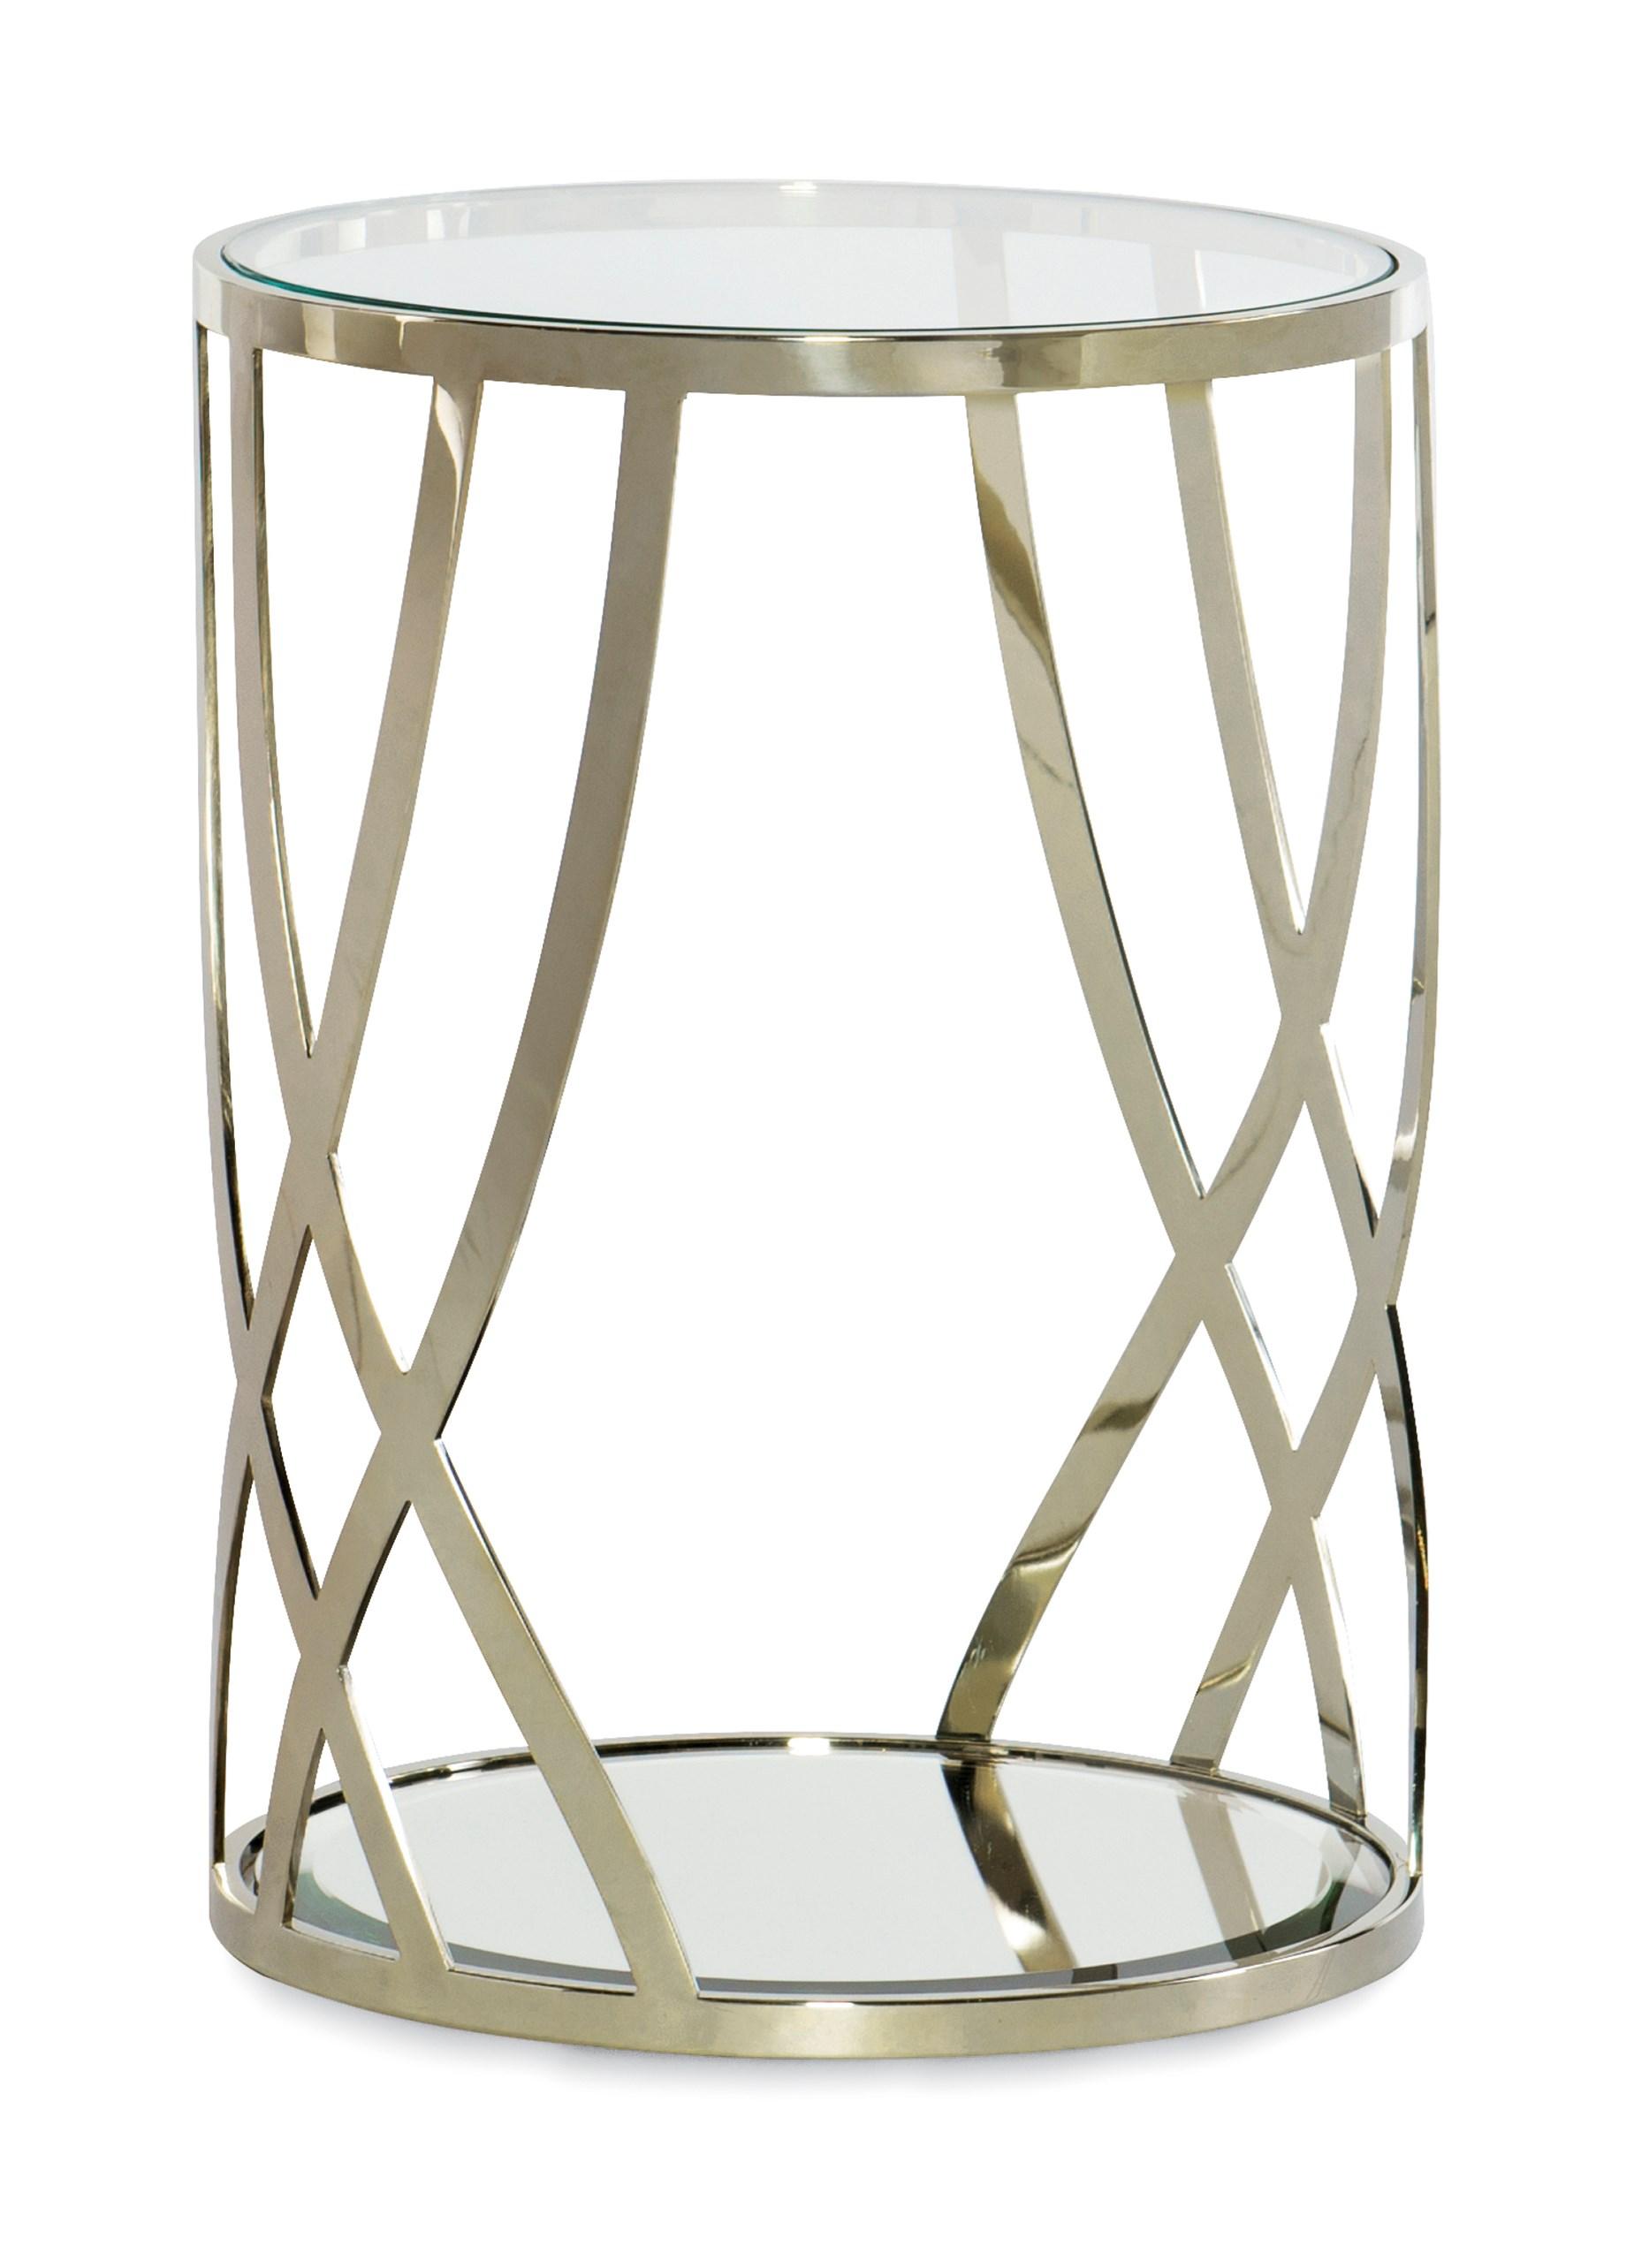 Contemporary End Table ADELA ROUND TABLE C011-016-422 in Off-White, Taupe 